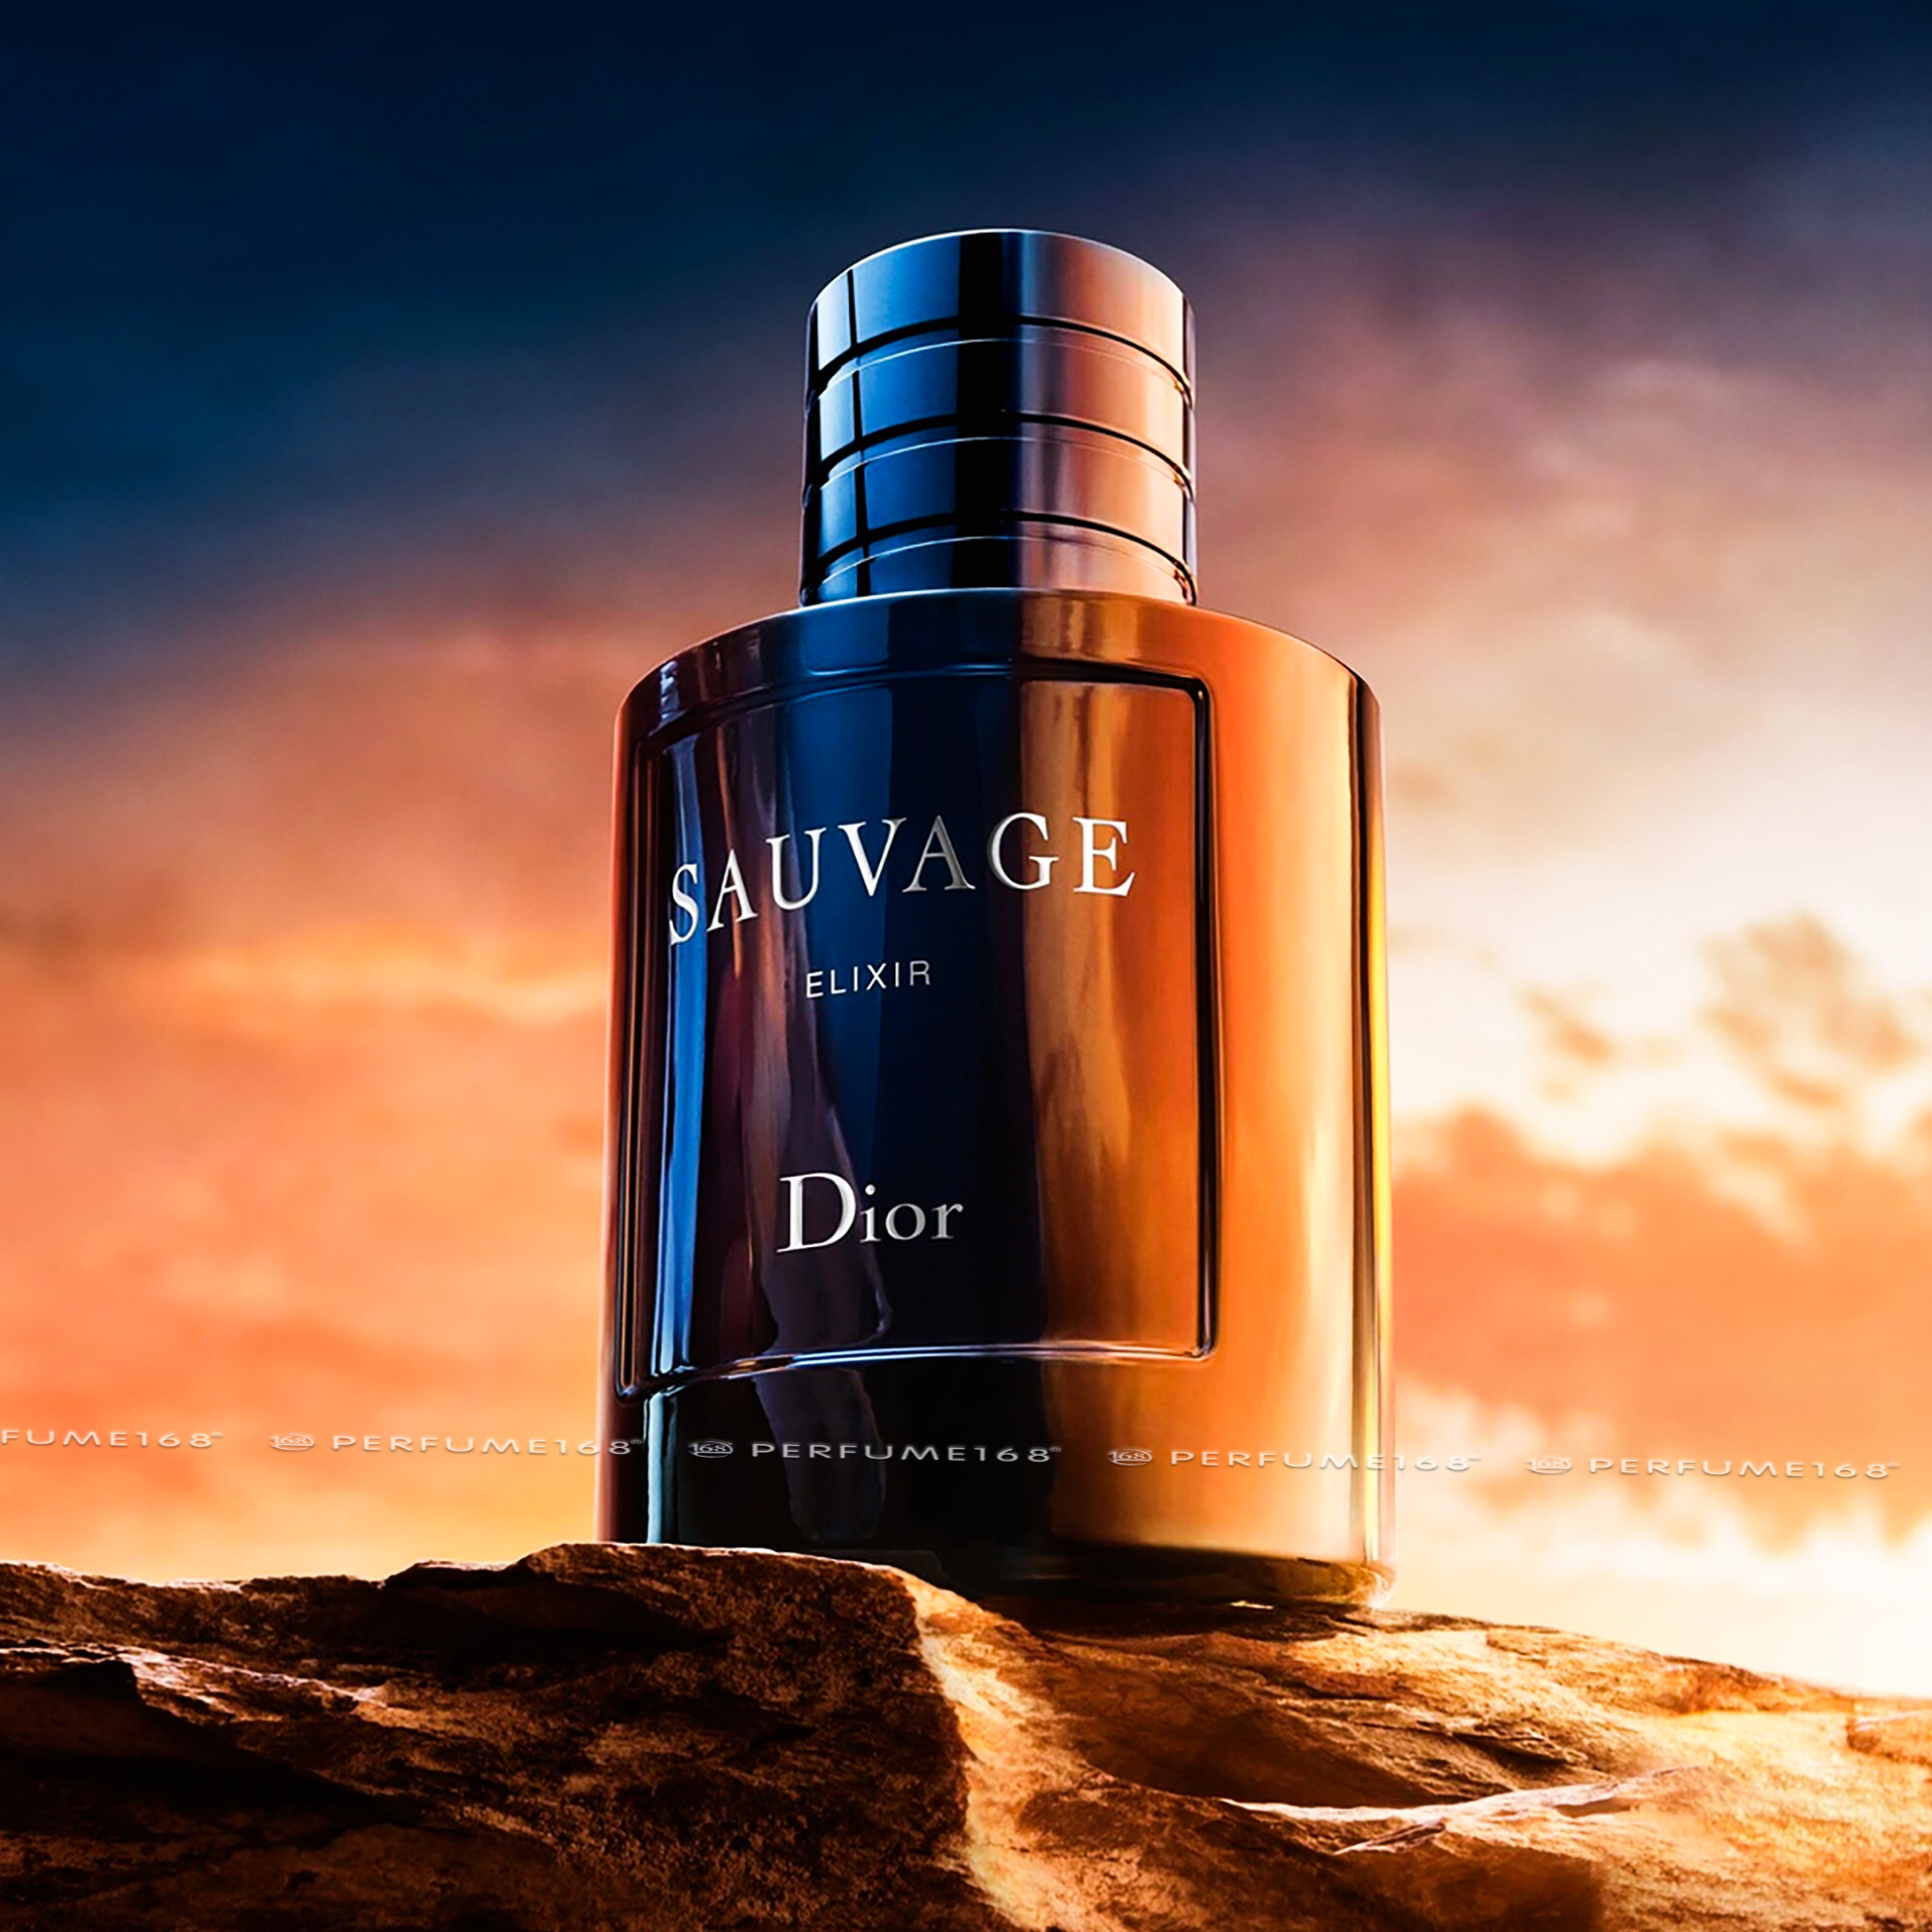 KDJ Inspired  Dior Inspired Collection  Notes Similar to Sauvage Elixir  Mens 124S  KDJ Inspired